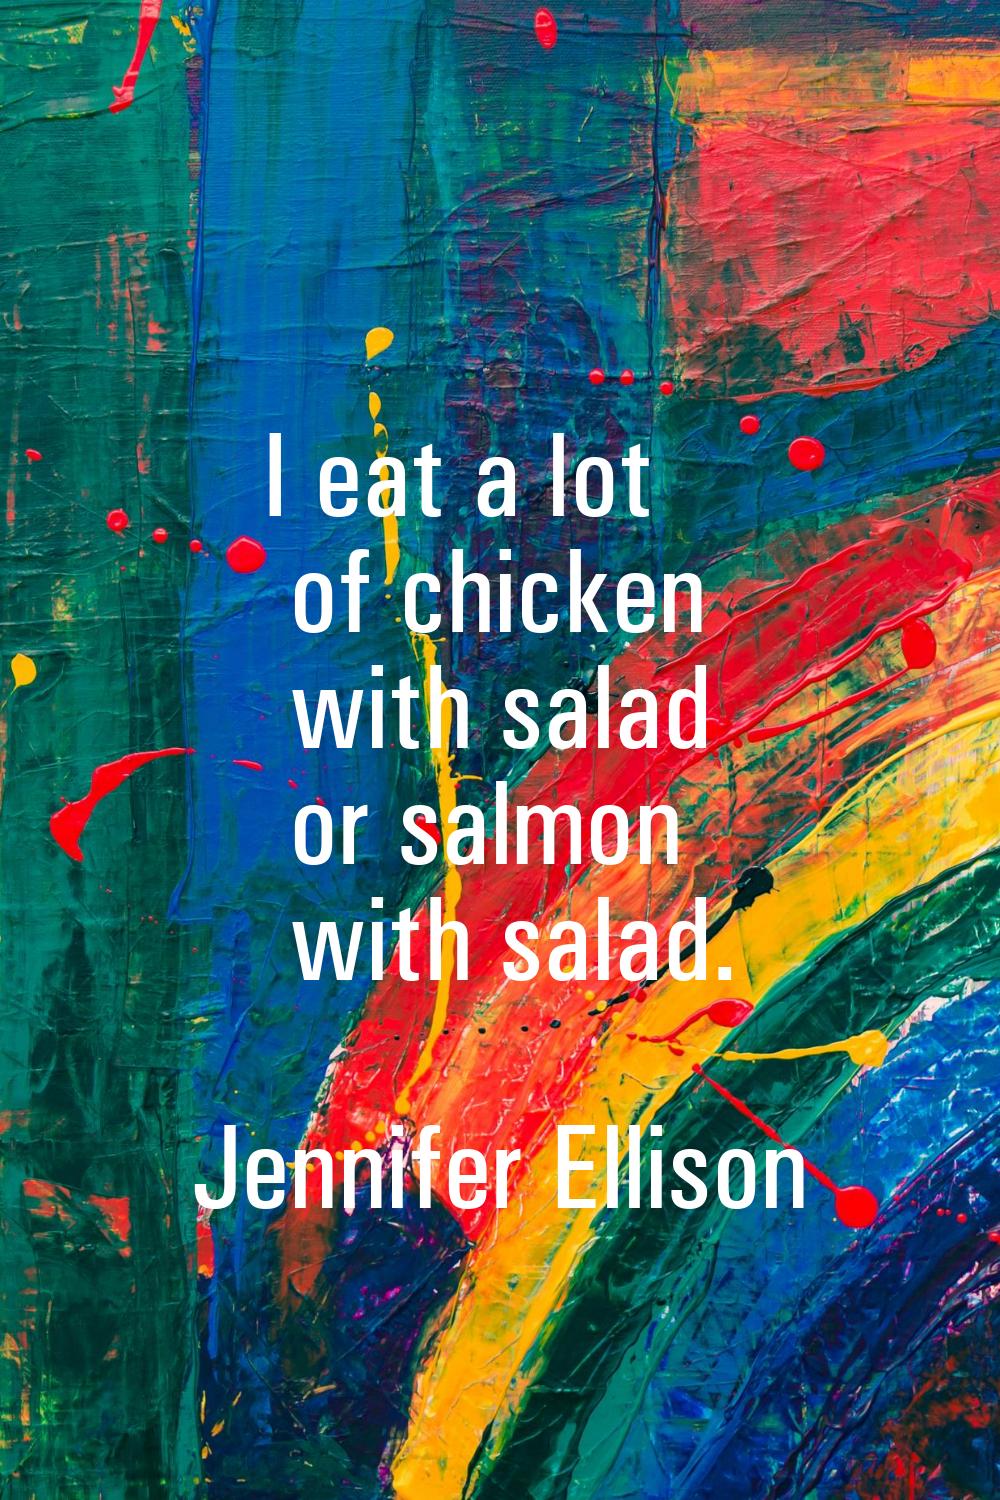 I eat a lot of chicken with salad or salmon with salad.